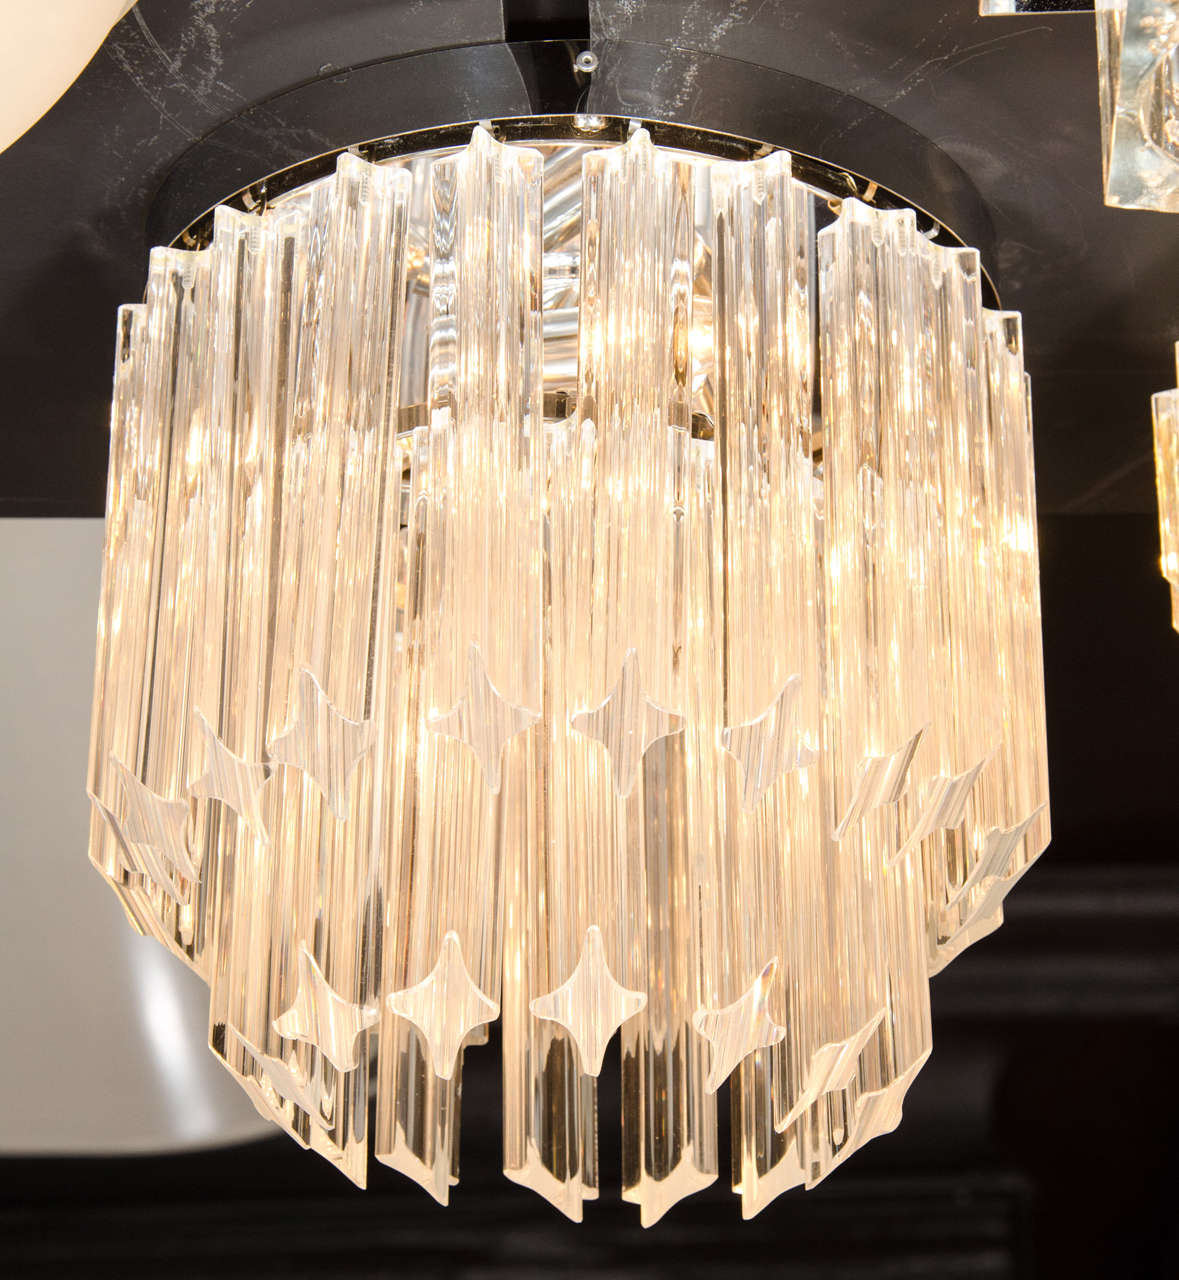 Mid-Century Modernist cut crystal flush mount chandelier by Camer. This flush mount chandelier features two tiers of cut crystal Triedre rods that have been cut at an angle and hung in a descending fashion for added dimension and style. Each tier of